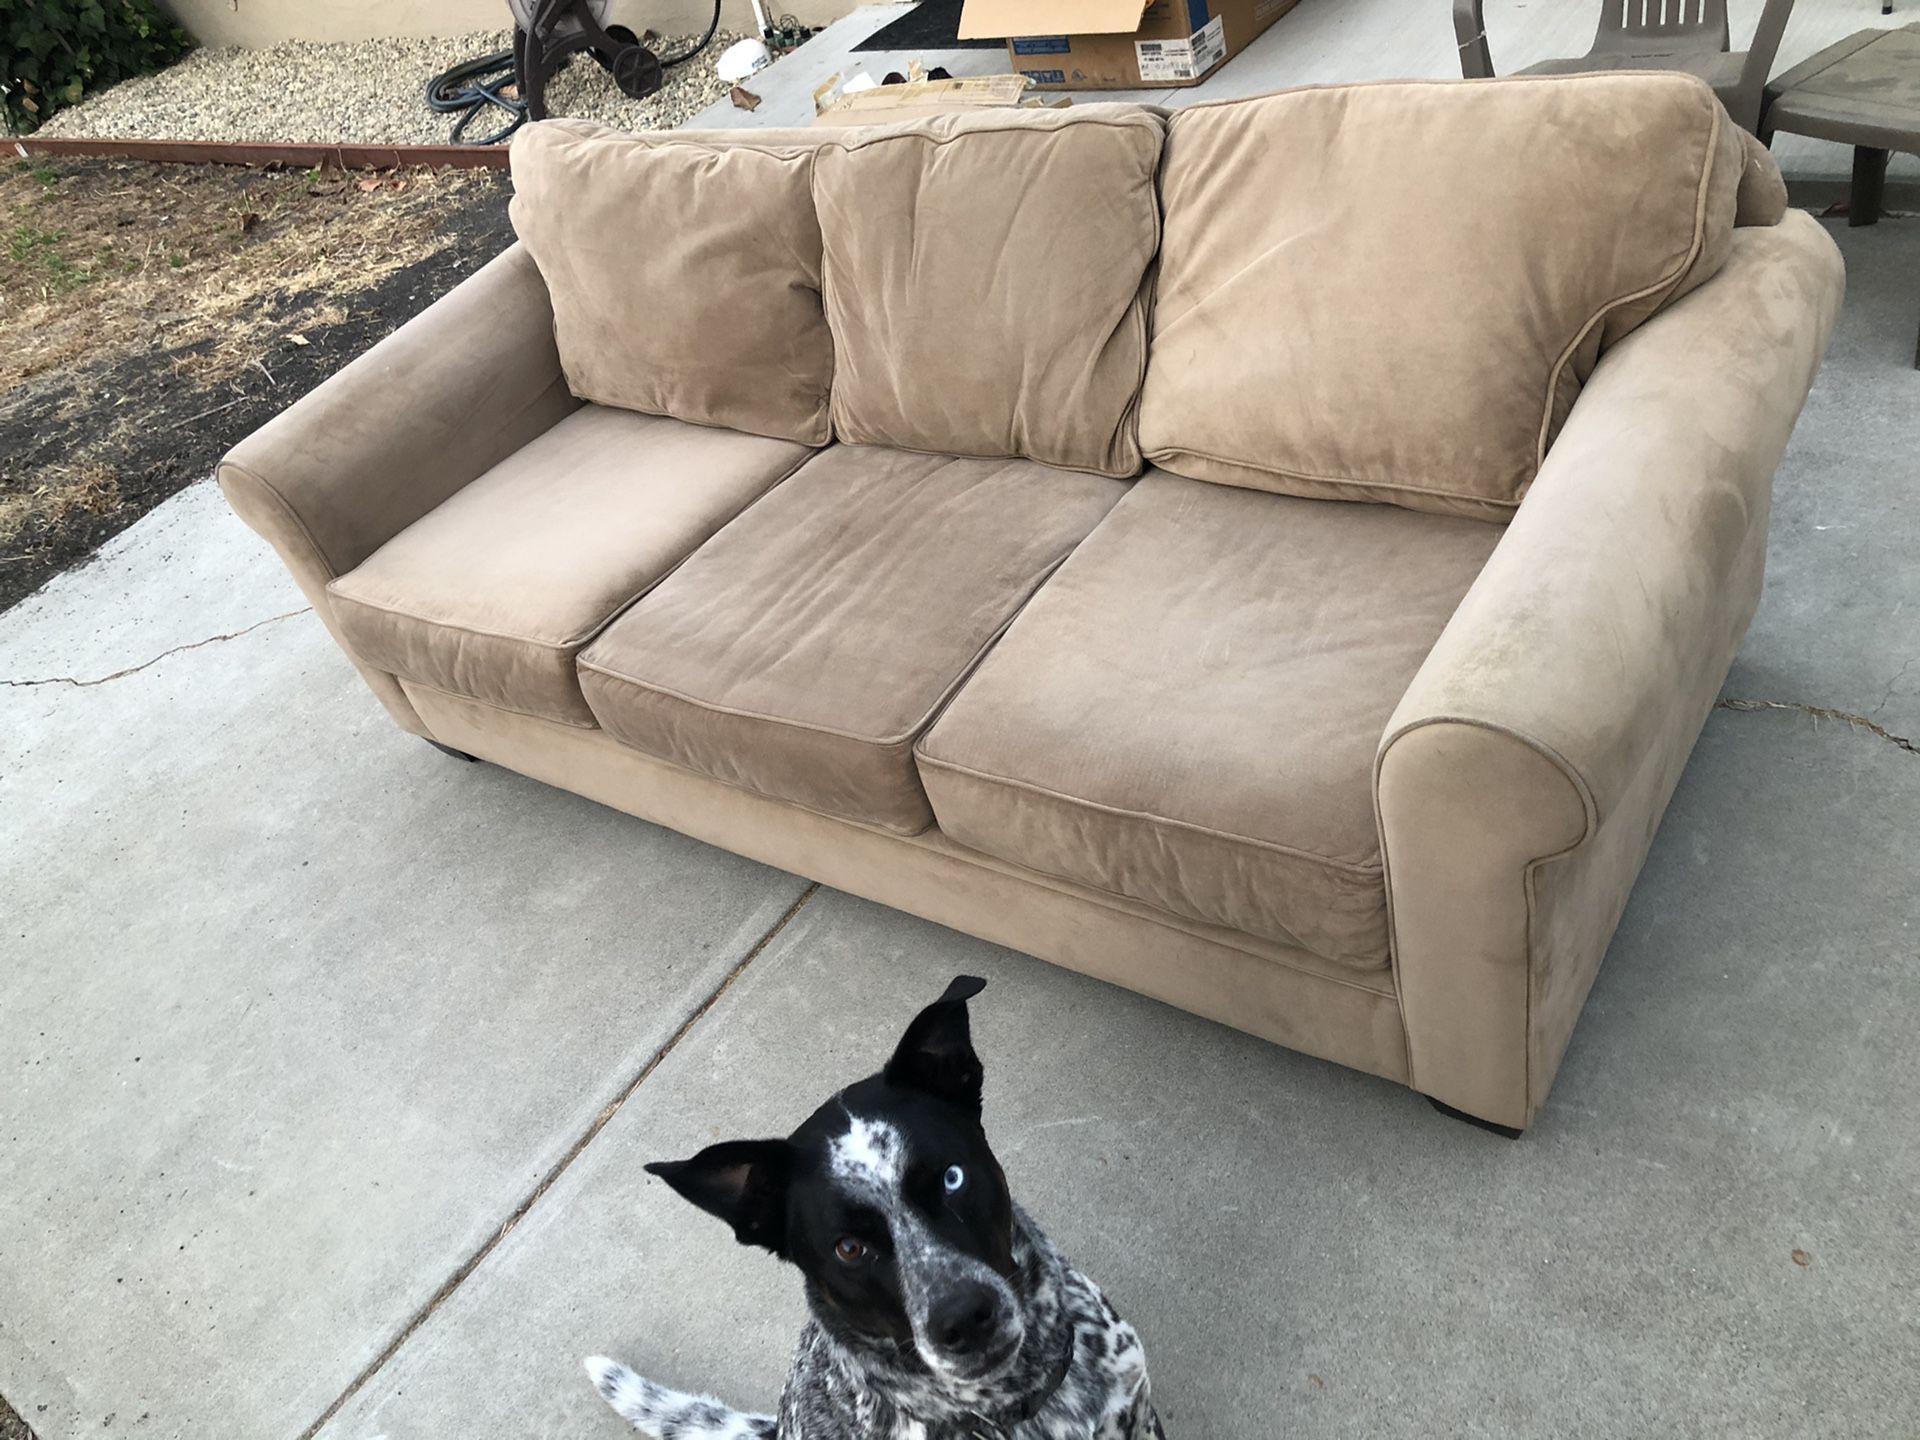 Tan/Brown Couch FREE!